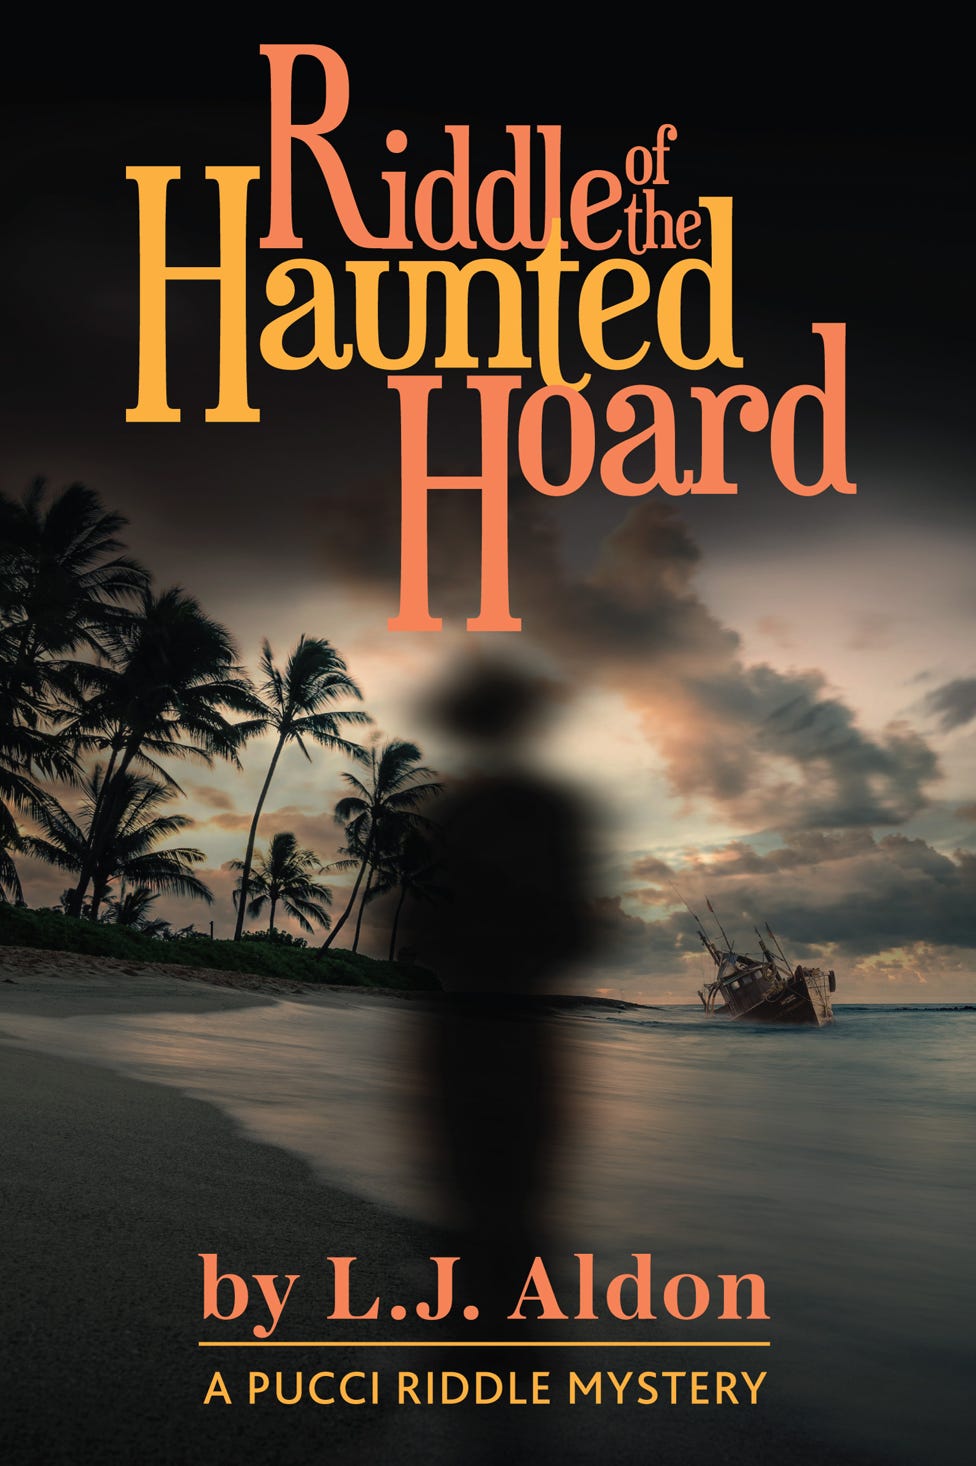 Ghost story cozy mystery!